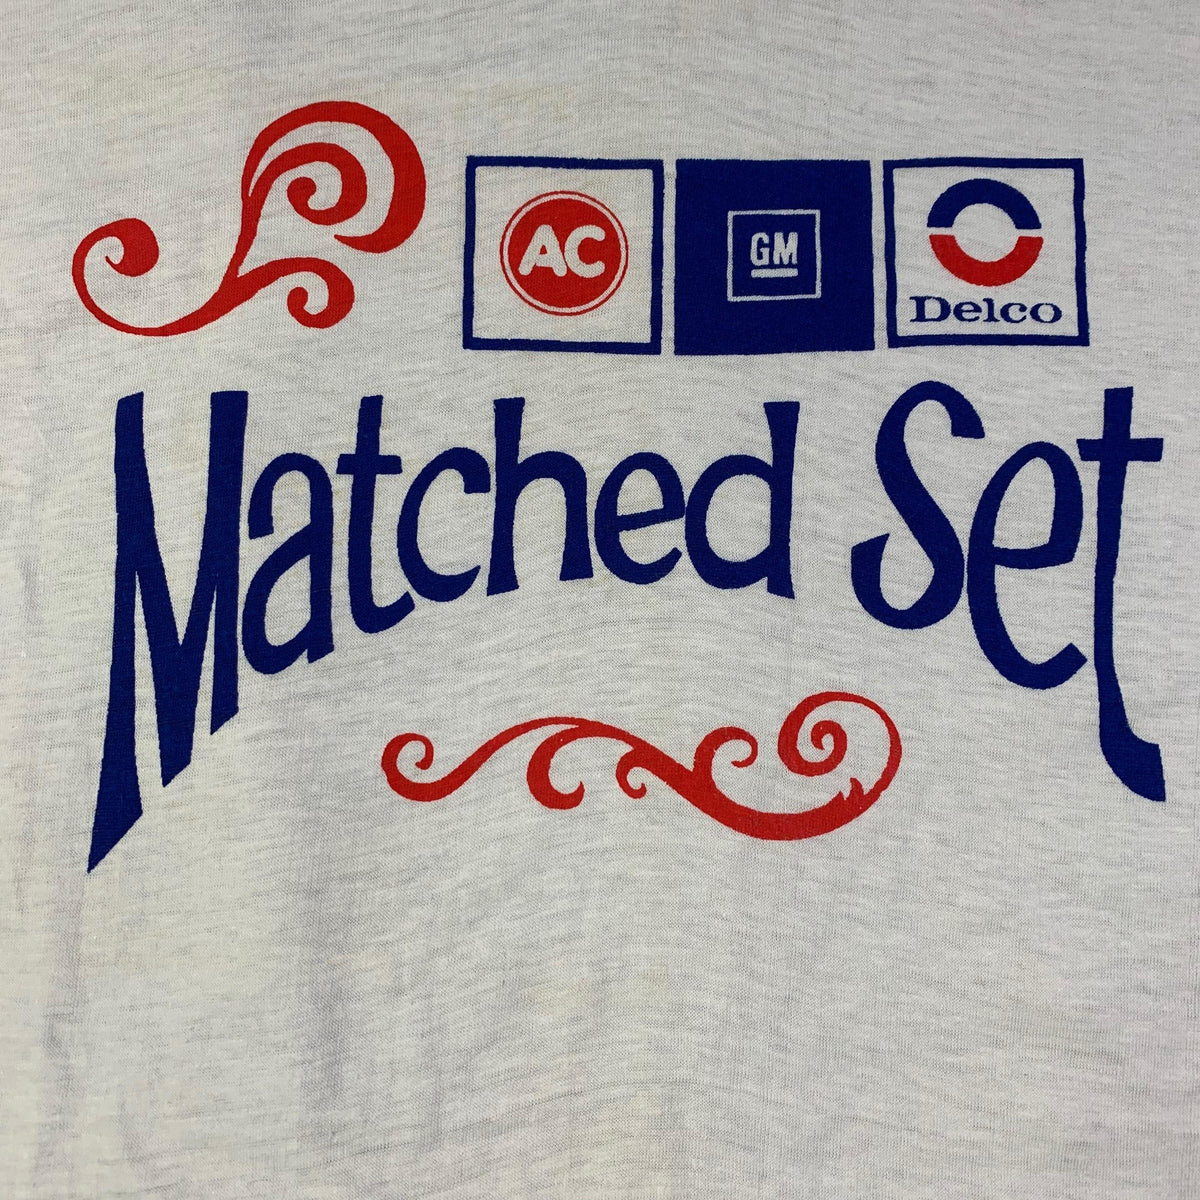 Vintage Original ACDelco Matched Set T Shirt graphic detail AC GM Delco